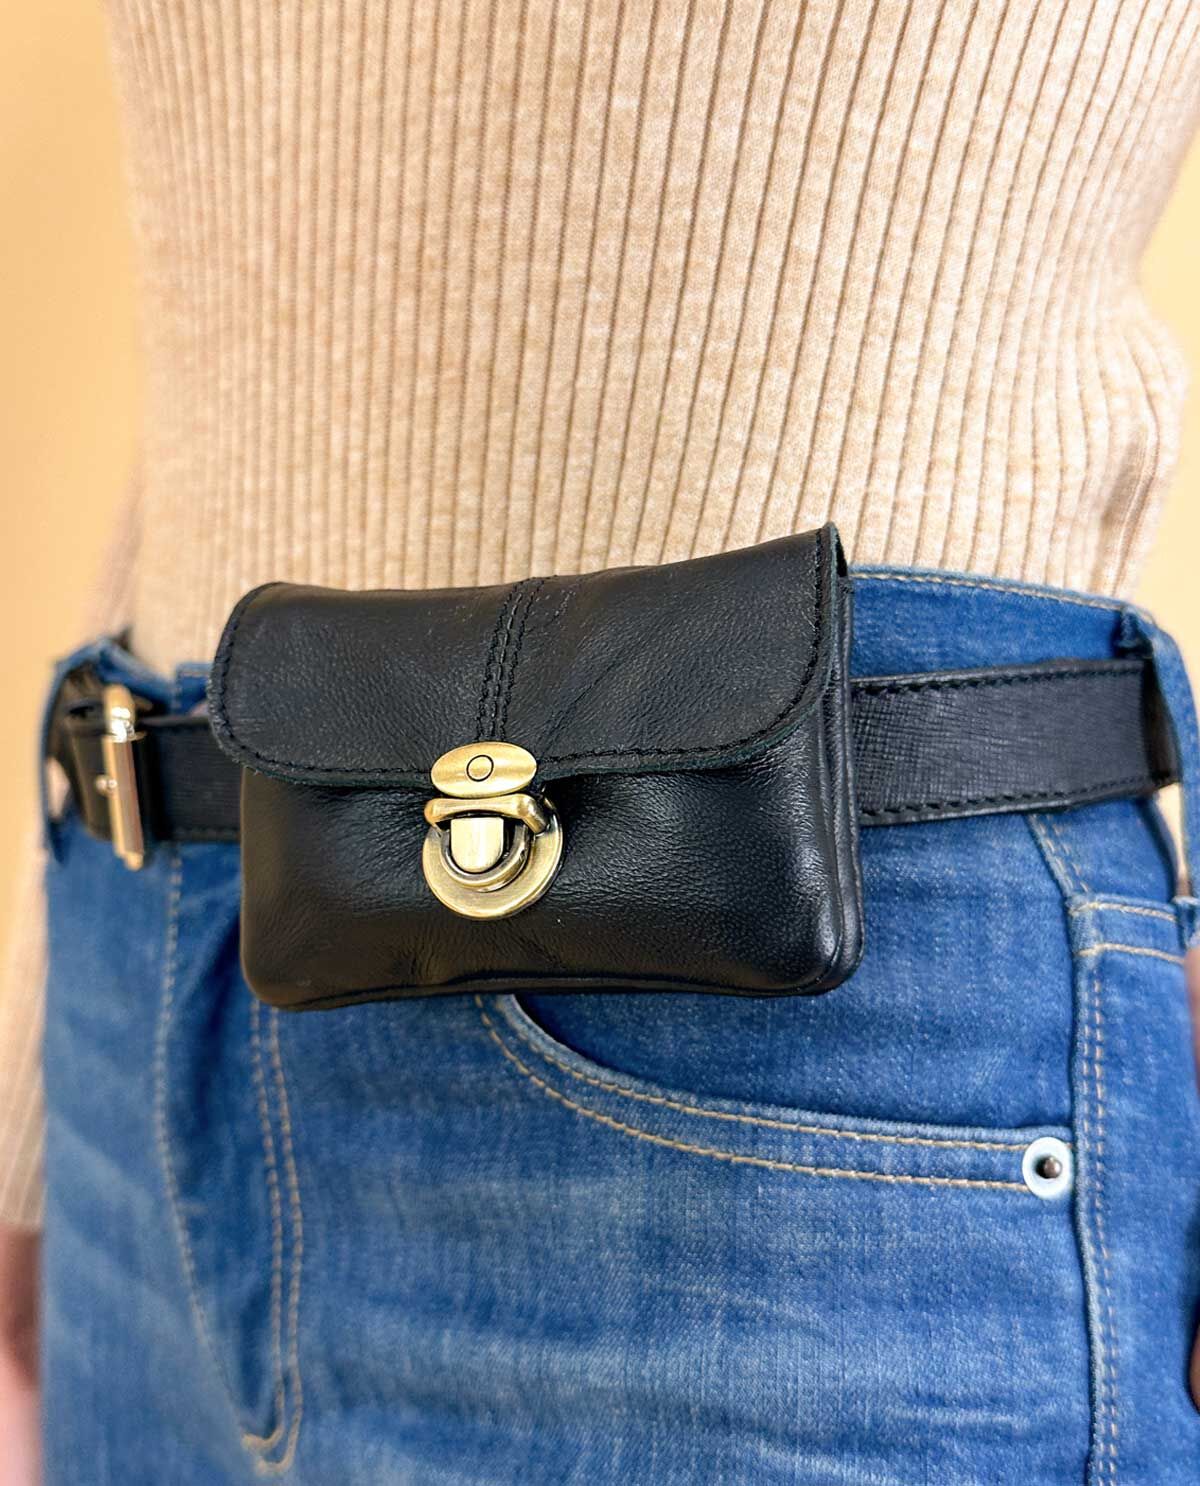 Leather belt bag “Chapal” at gusti-leather.co.uk